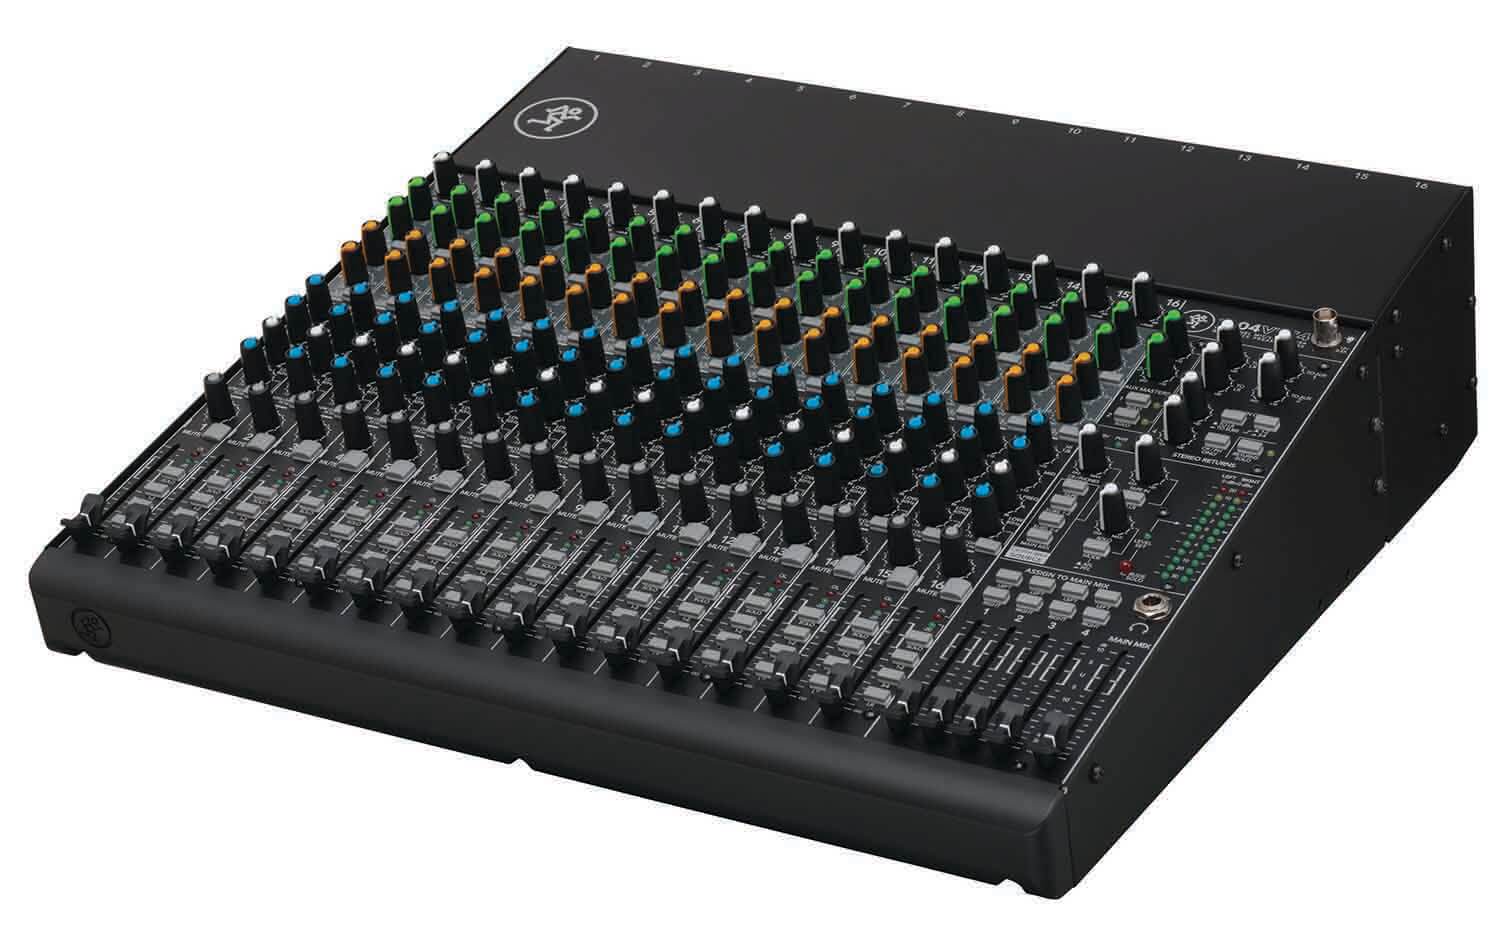 Mackie 1604VLZ4 16-Channel 4-Bus Compact Mixer - Hollywood DJ